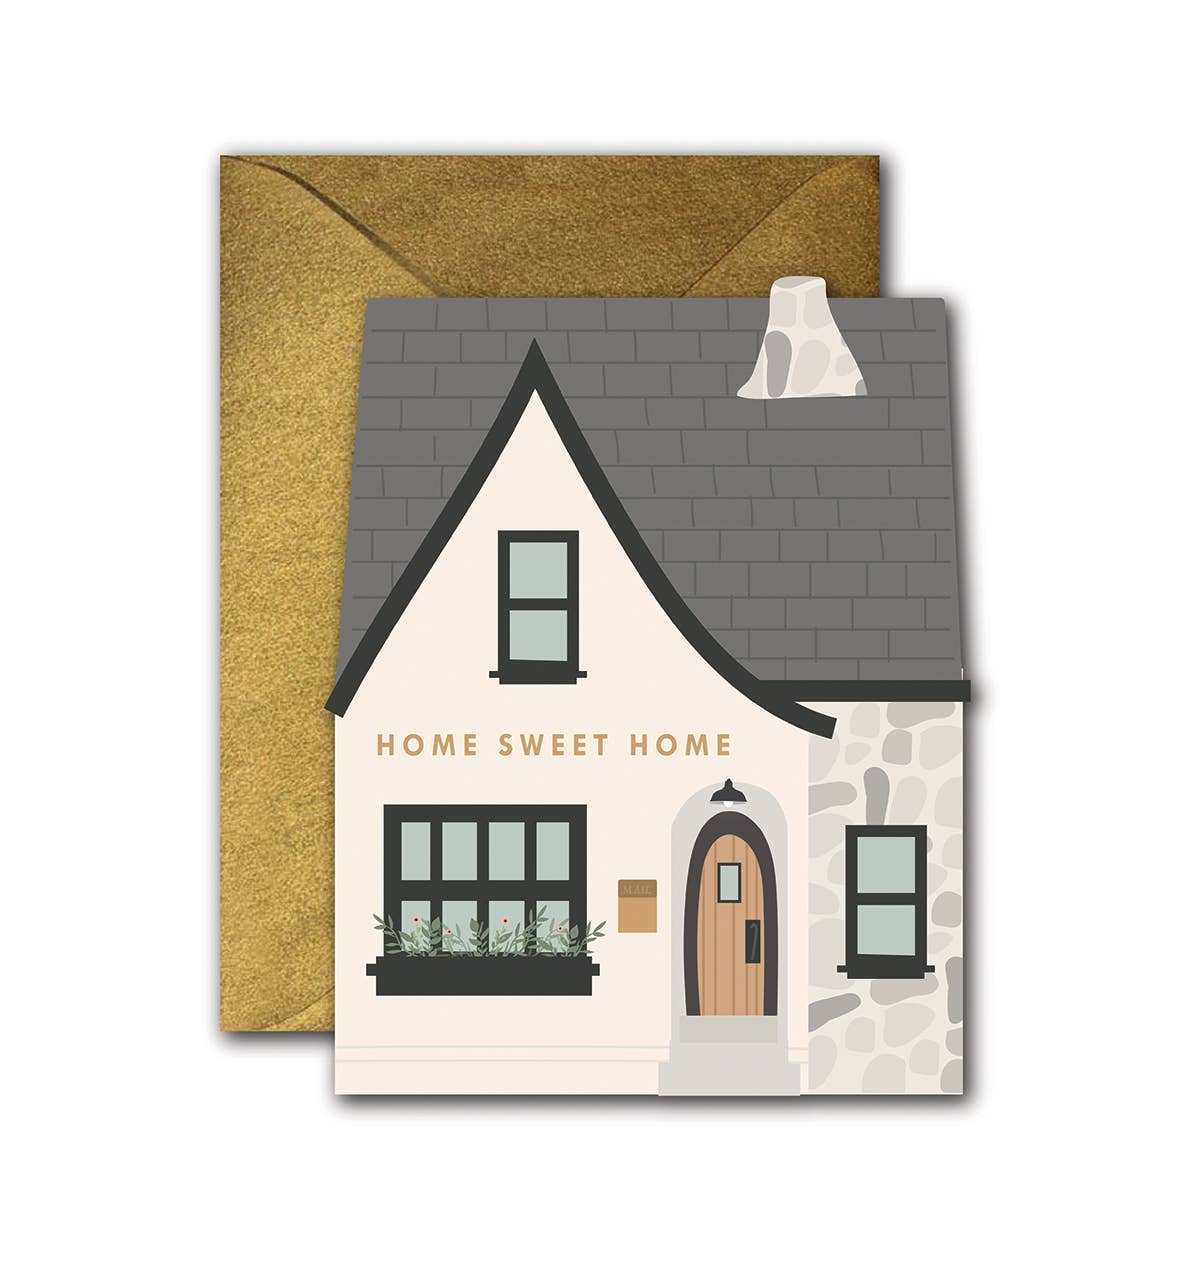 Home Sweet Home Greeting Card with coordinating envelope by Ginger P. Designs. A die cut card of a home with a saying home sweet home. 